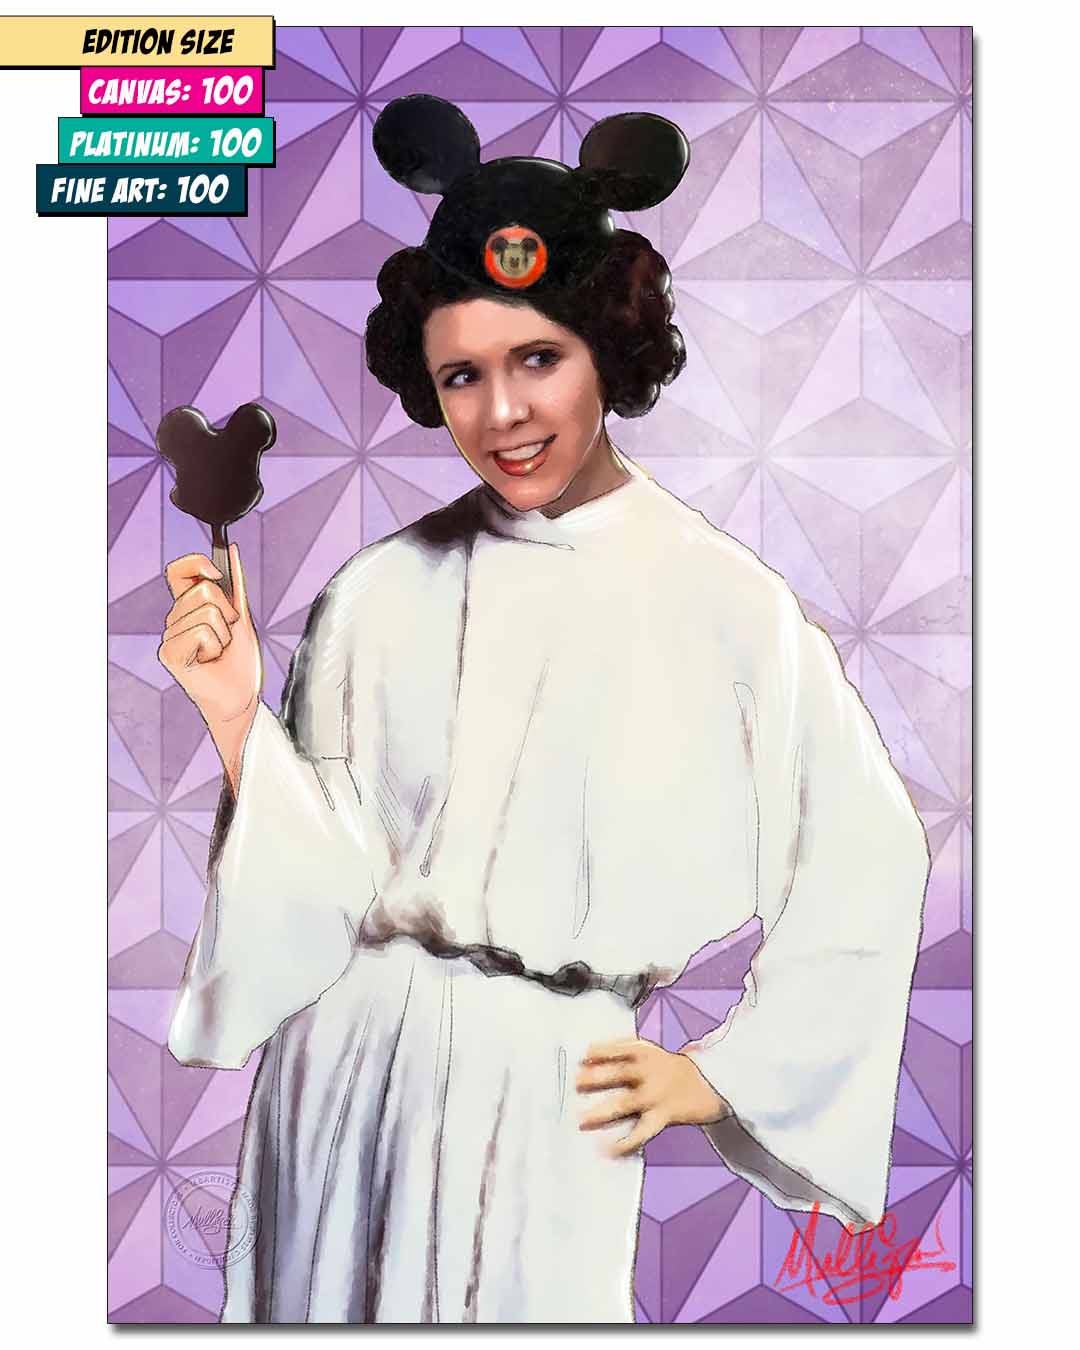 DISNEY STARLETS: CARRIE FISHER